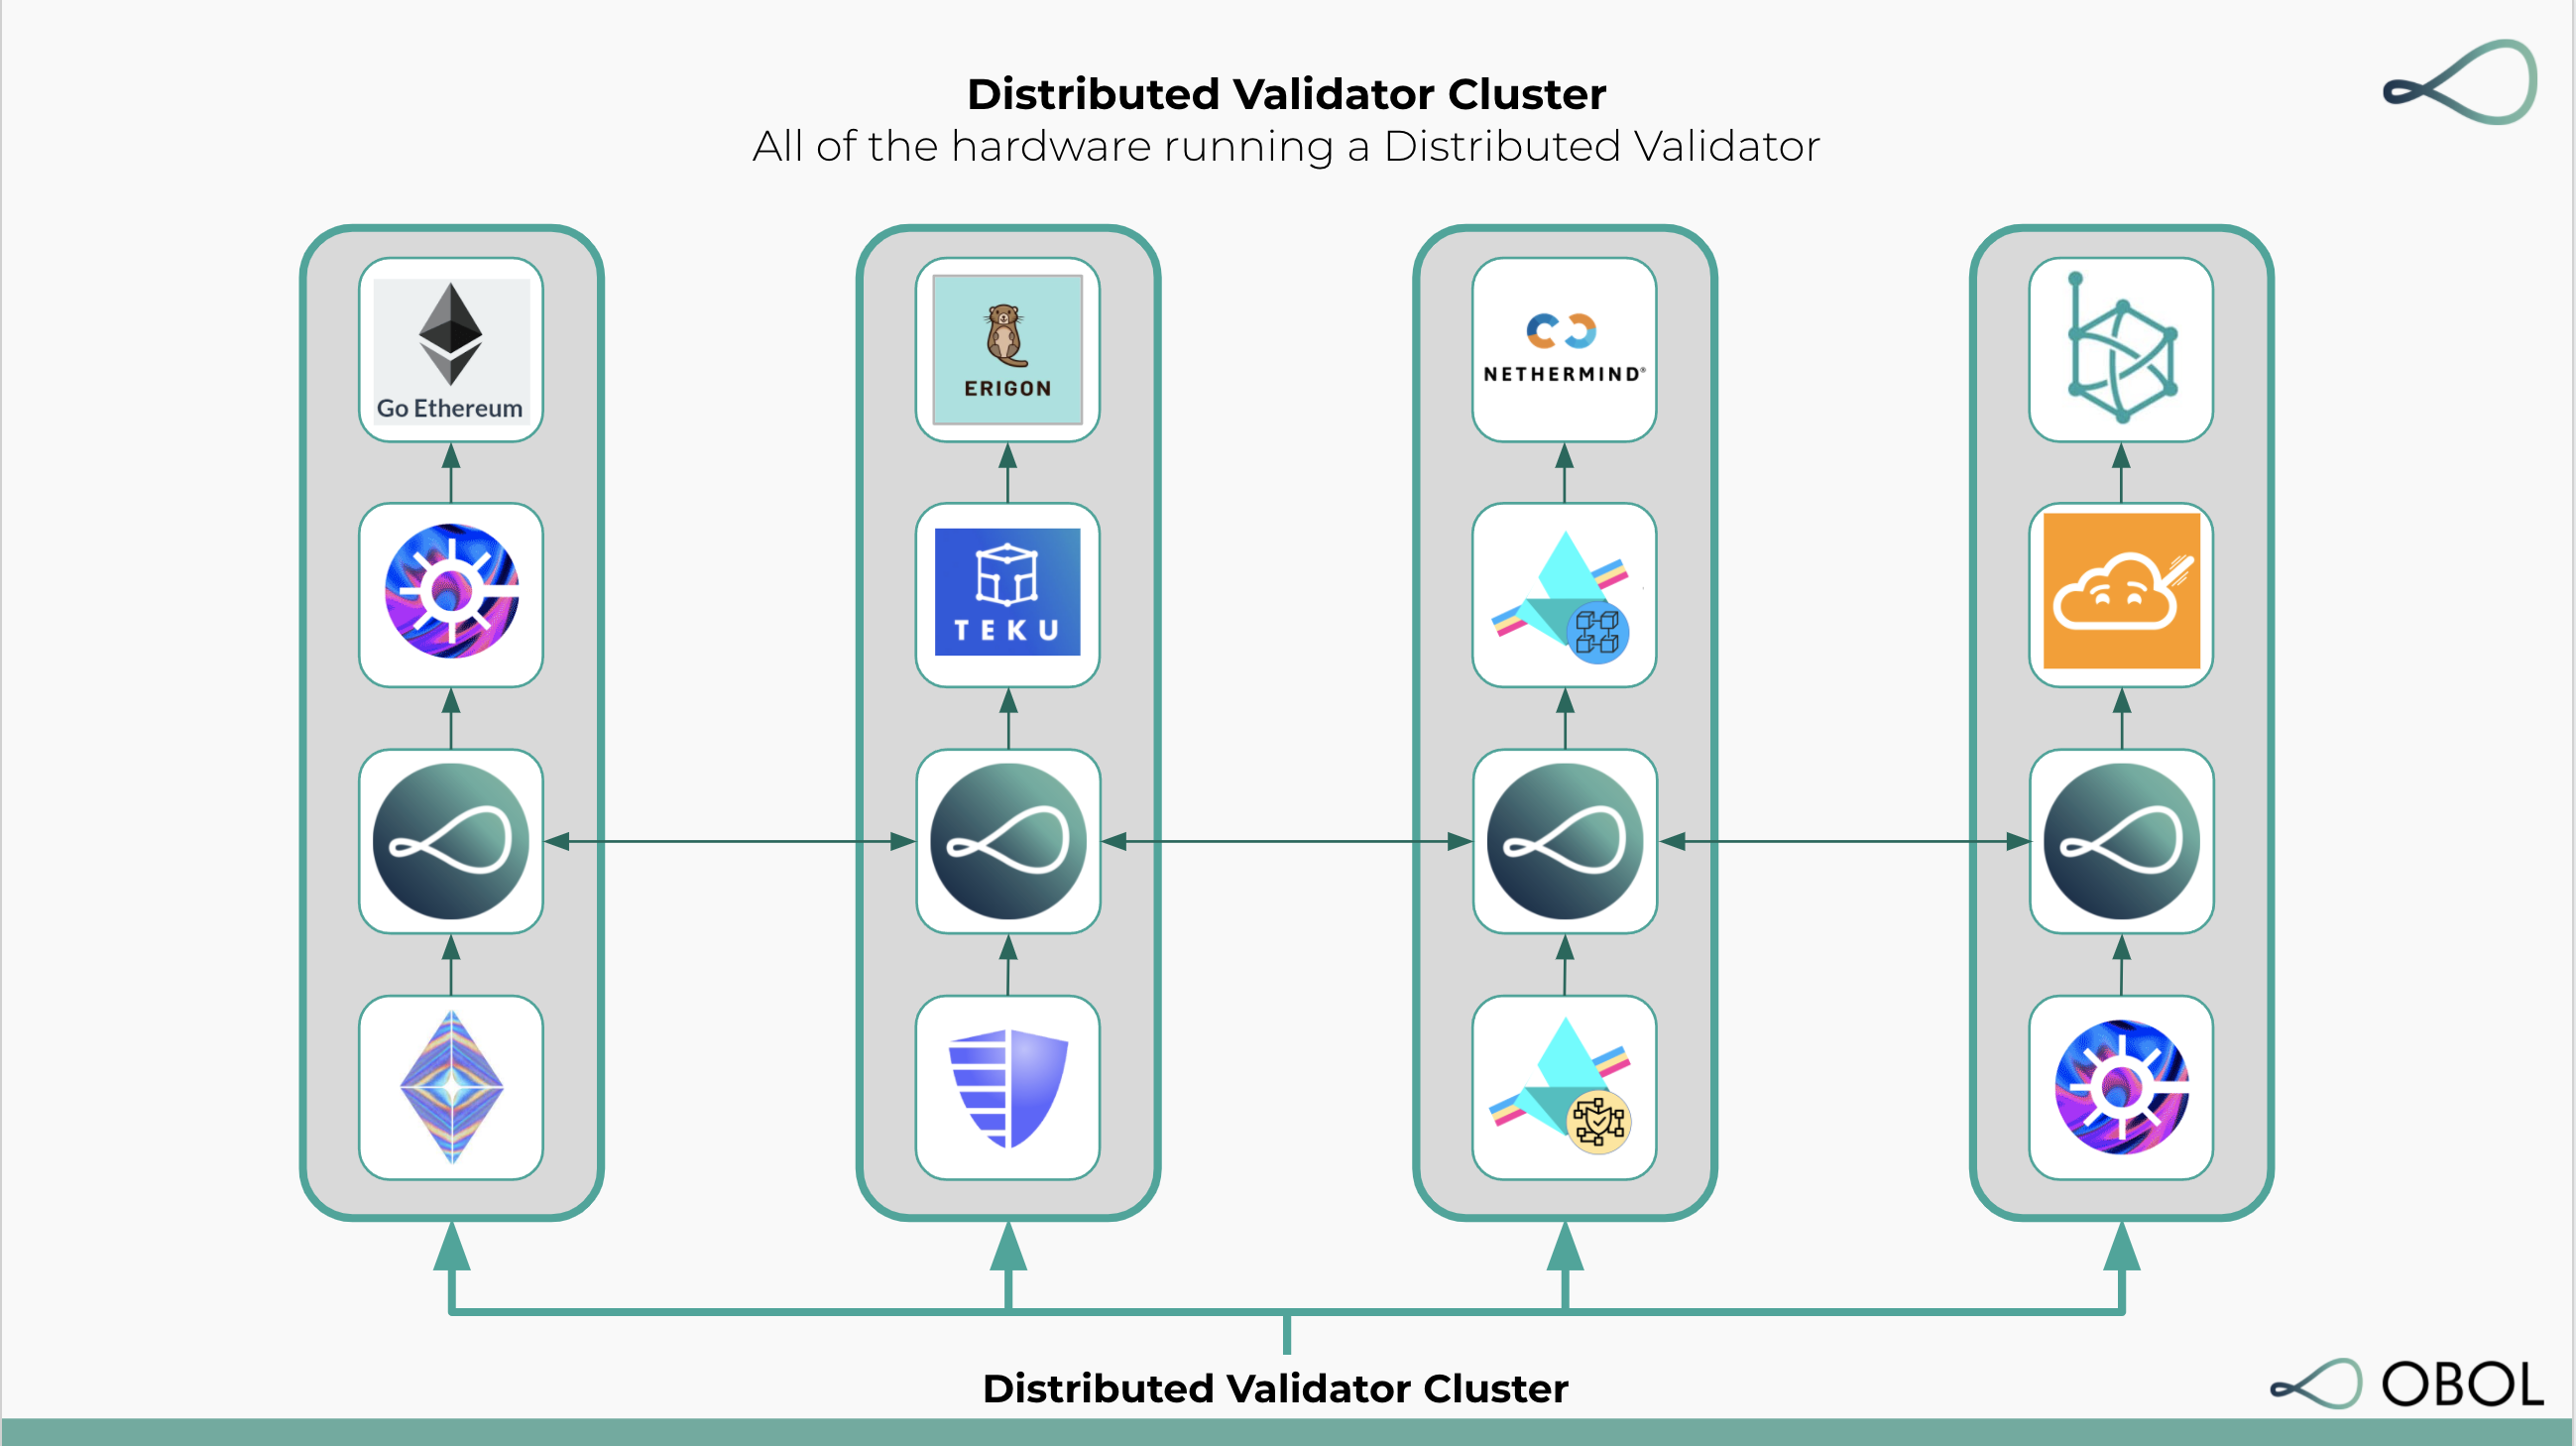 A Distributed Validator Cluster